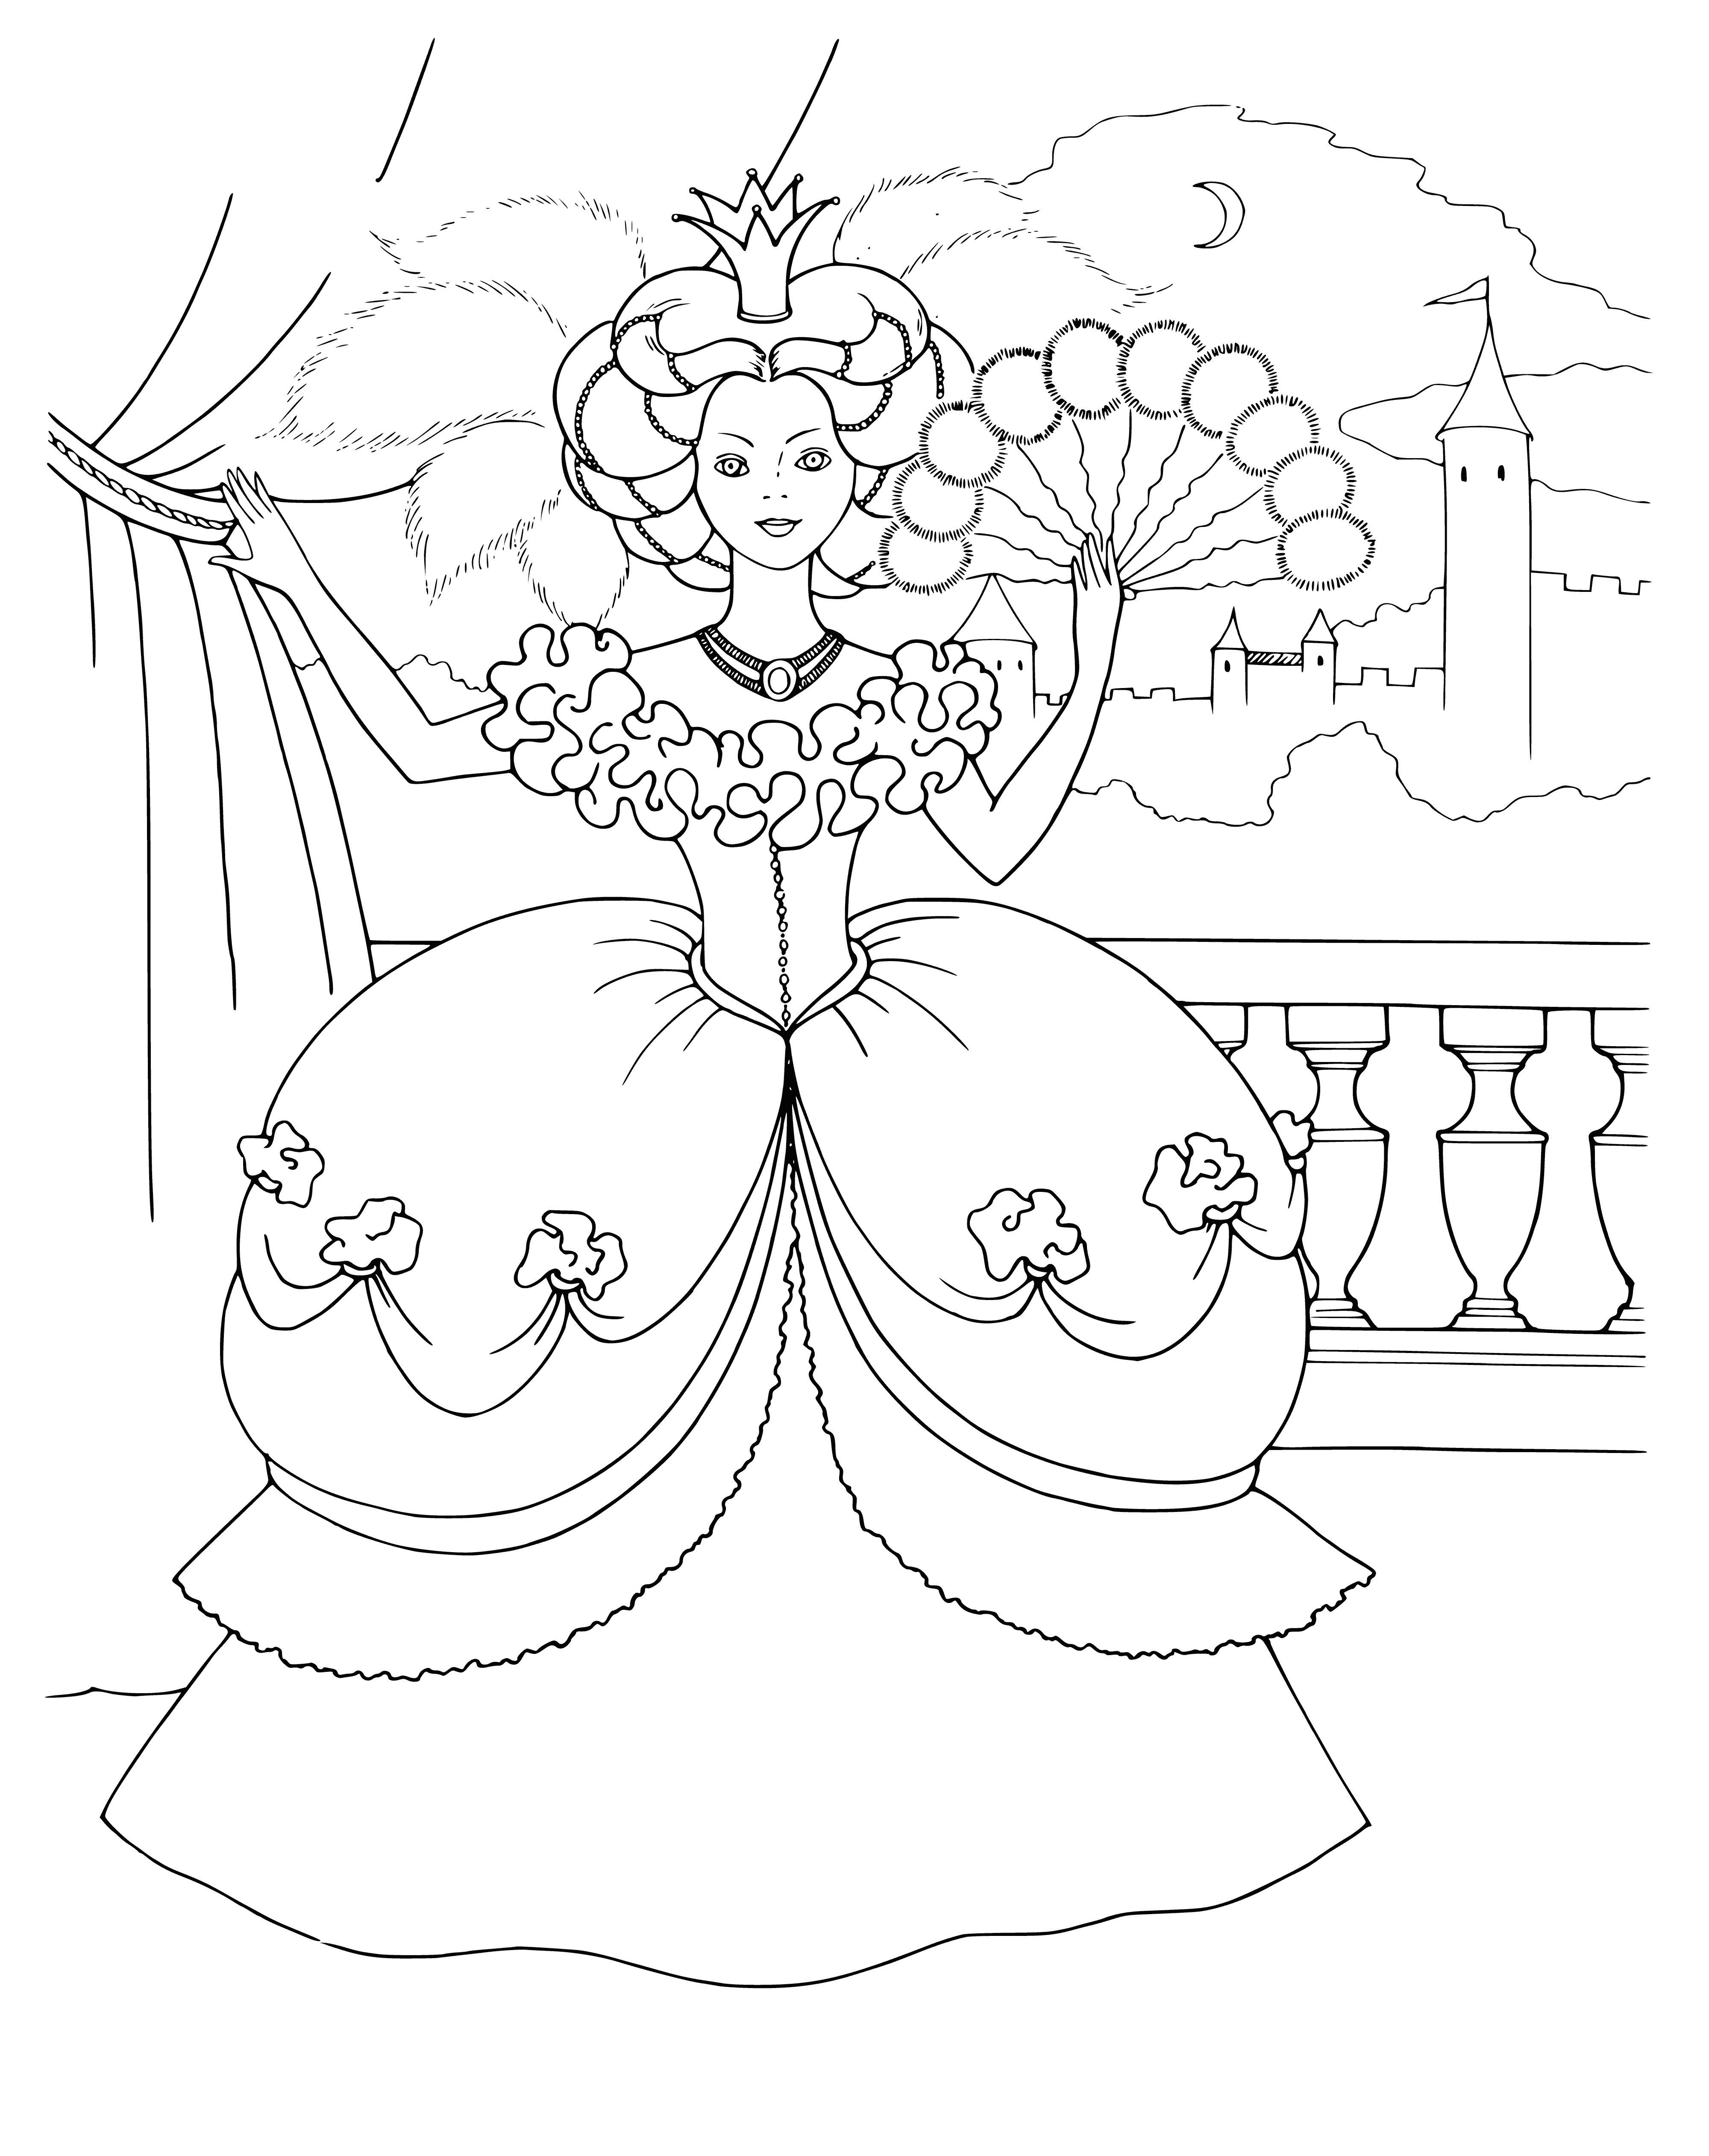 coloring page: Princess stands on balcony, wearing white dress/gold crown, arms outstretched, gazing up at sky. #coloringpage